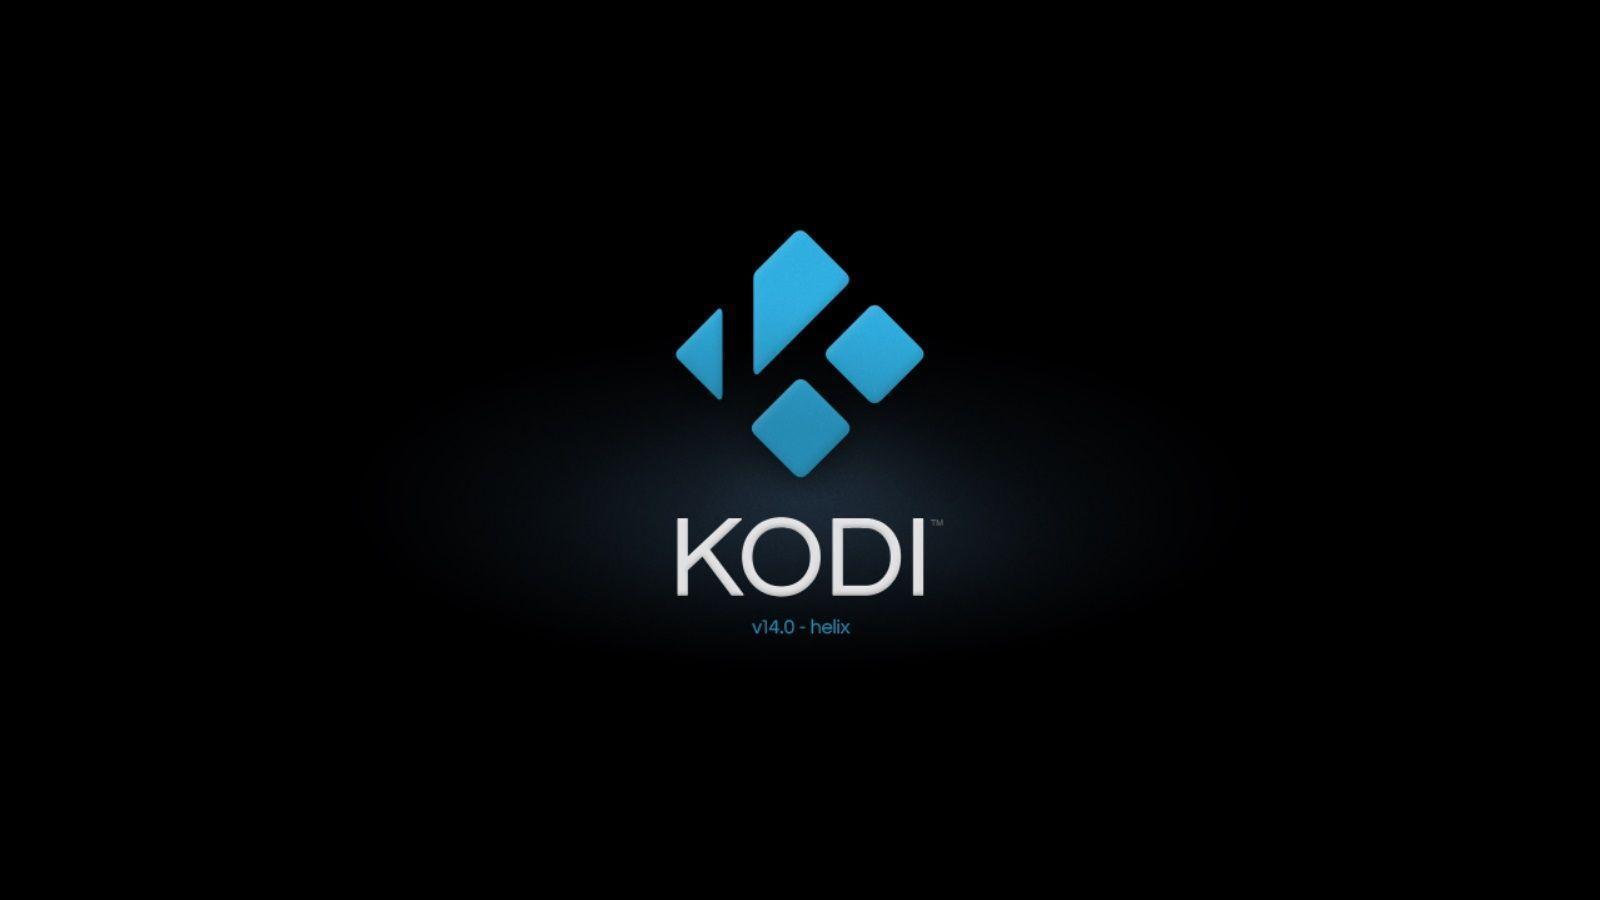 Kodi 14 "Helix" (Formerly Known As XBMC) Final Version Released